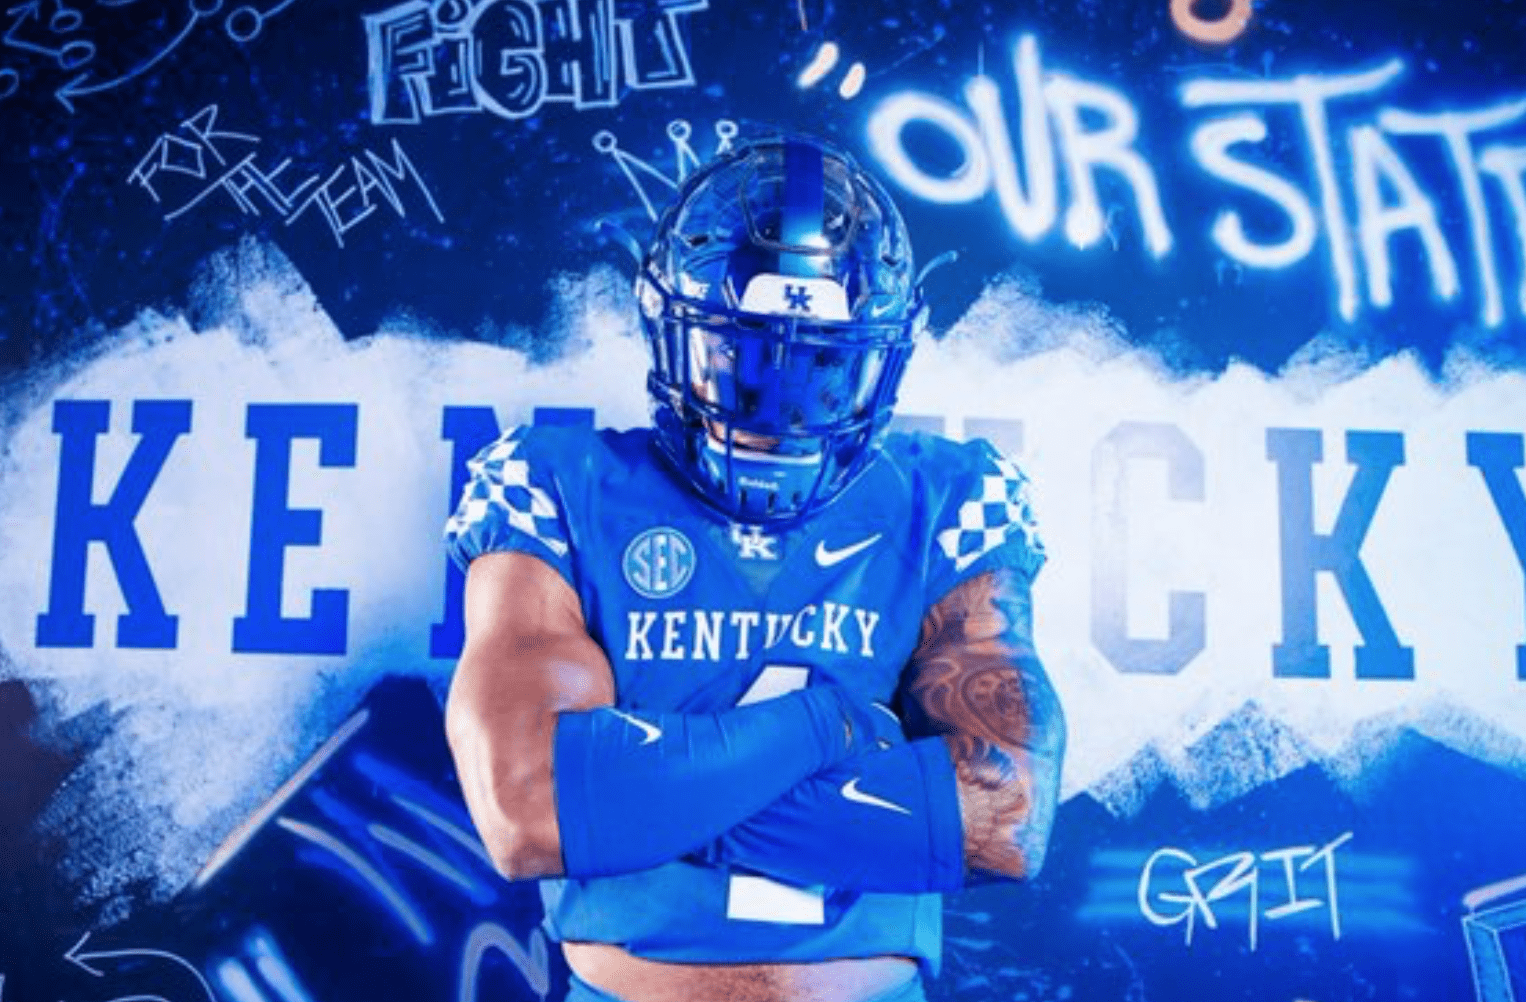 Ramon Jefferson the former small-school running back who recently transferred to the University of Kentucky recently sat down with Draft Diamonds